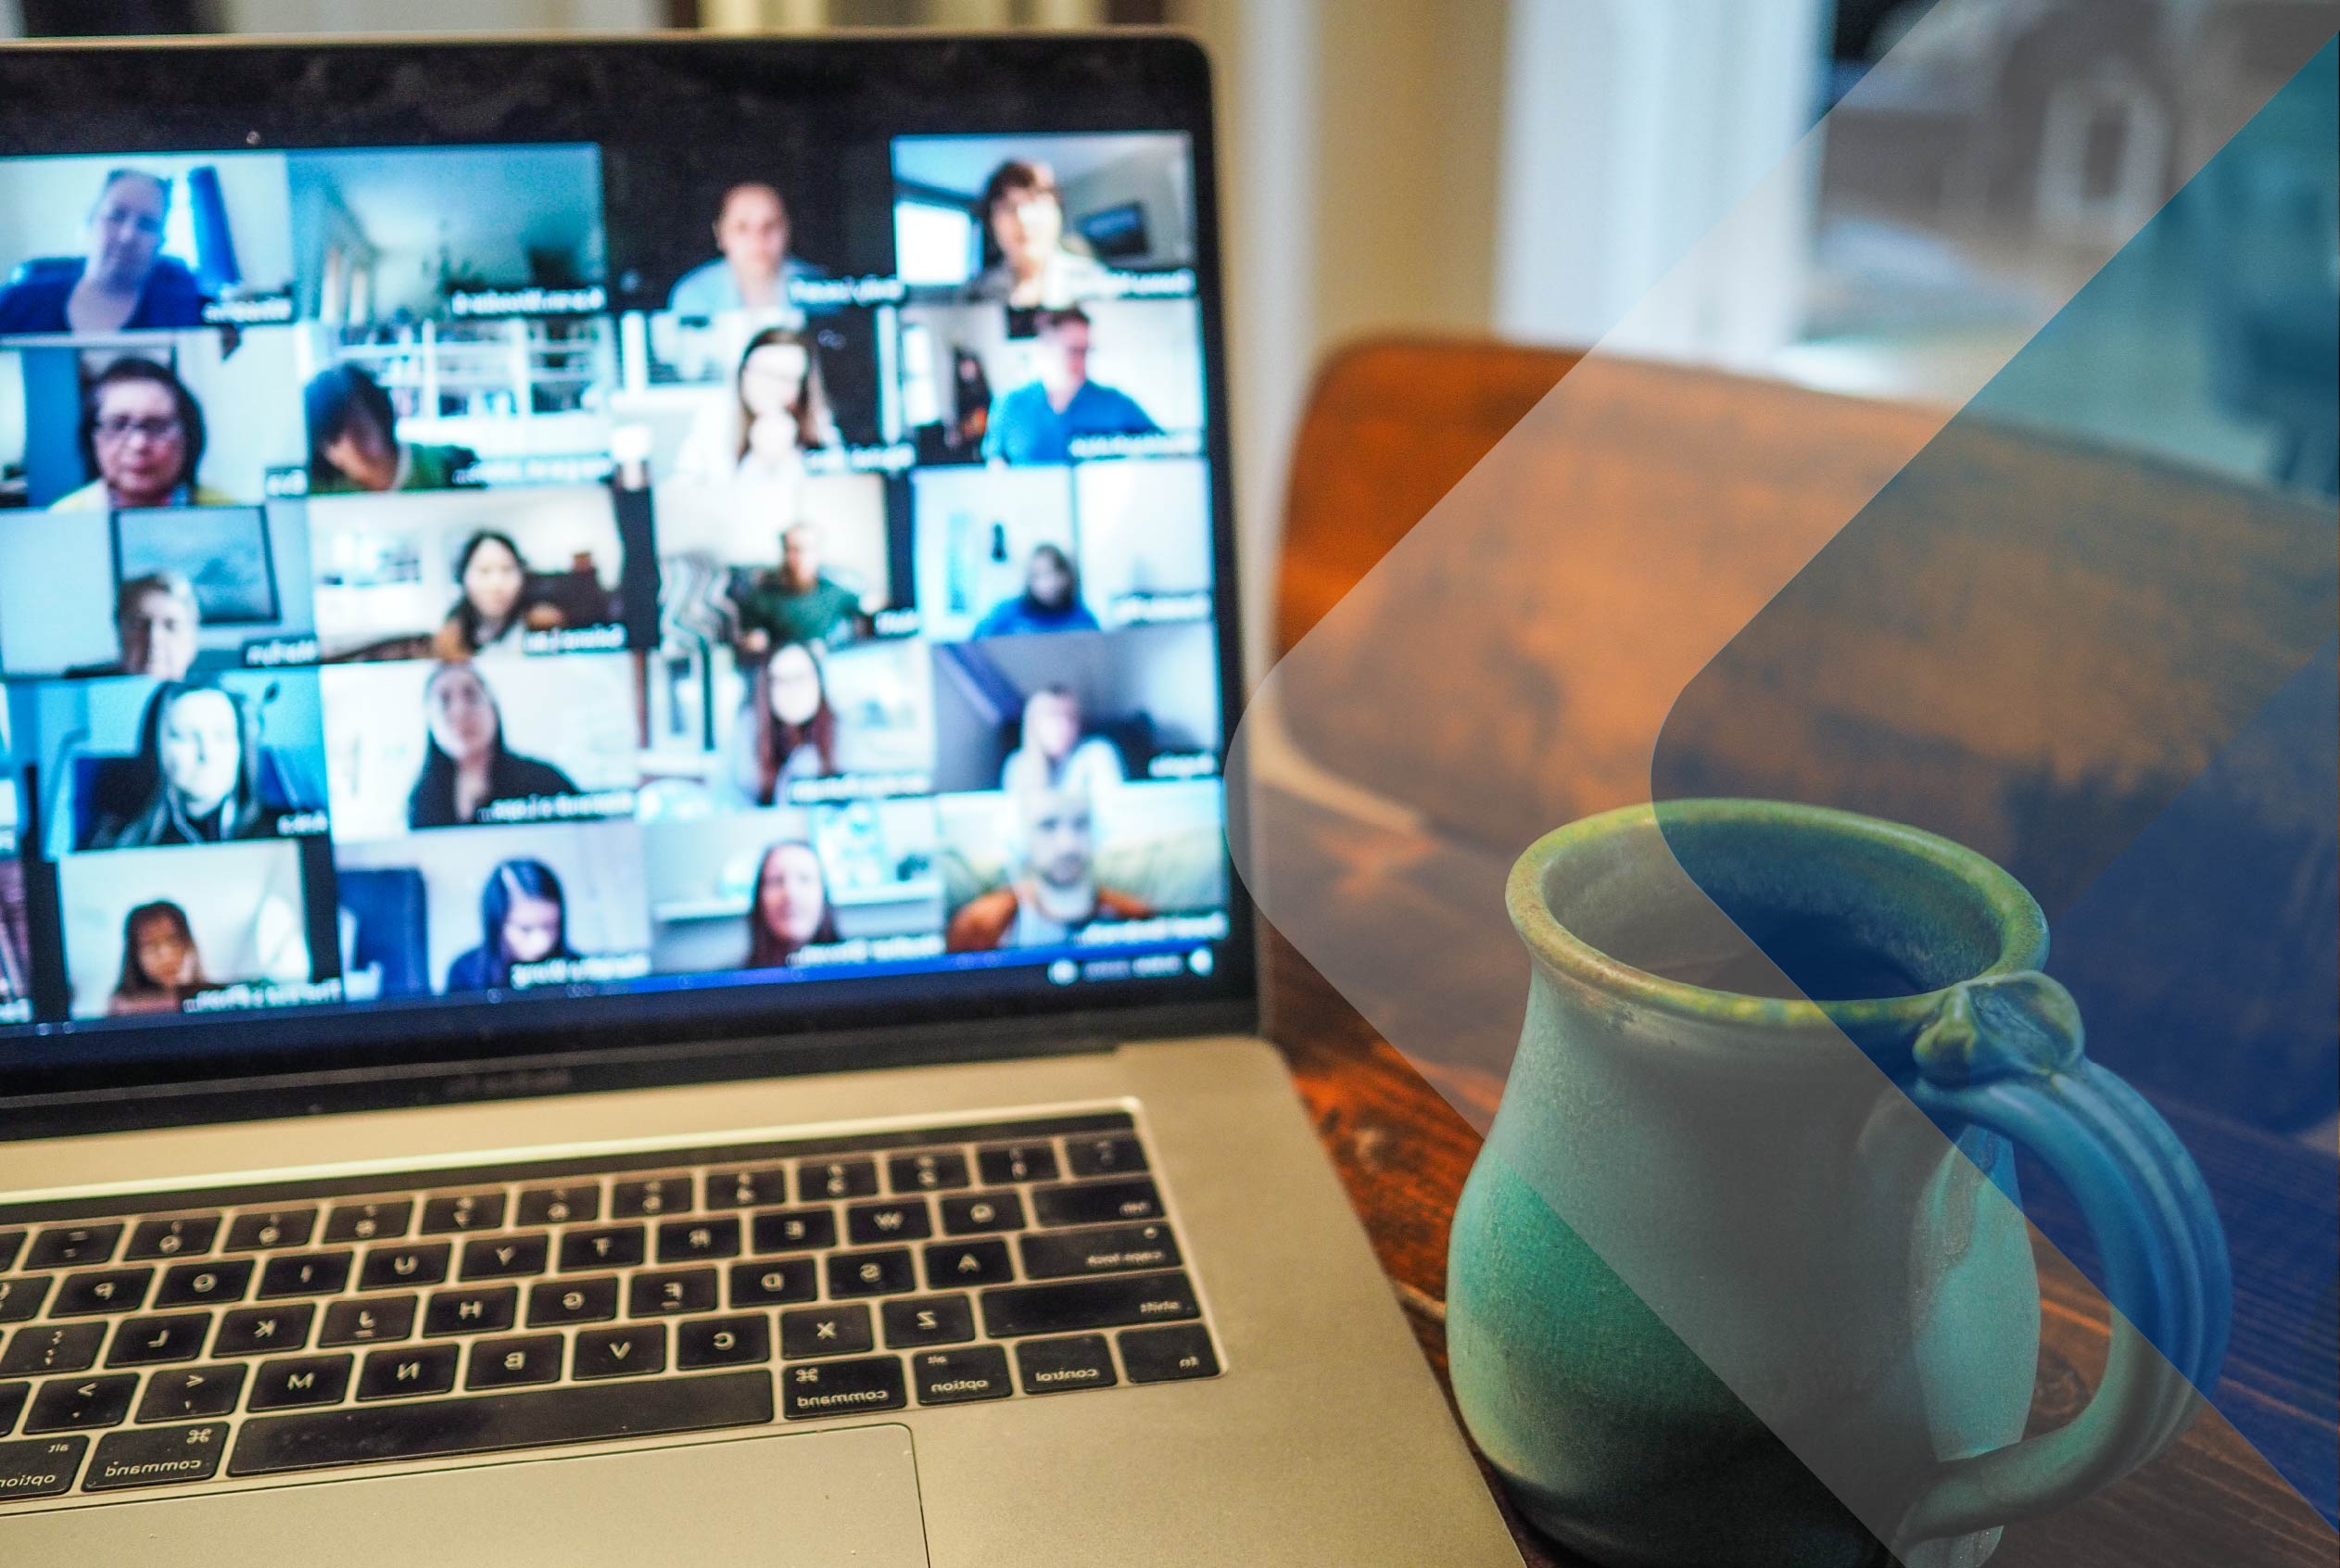 Stock image of a video call to accompany article on remote team building activities